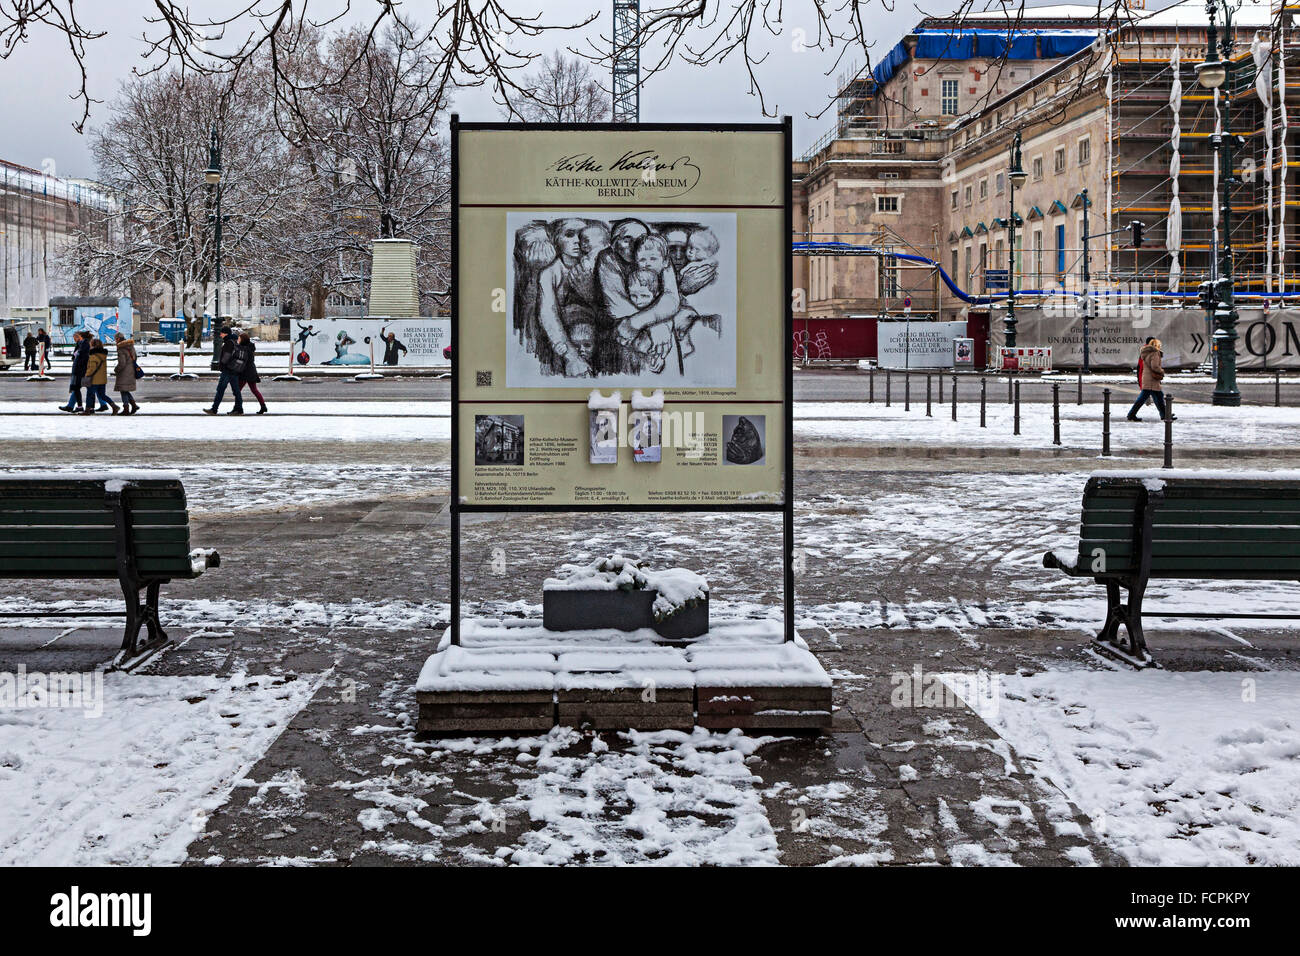 Sculptor, Kathe Kollwitz  Museum sign on a snow covered pavement in Berlin Stock Photo